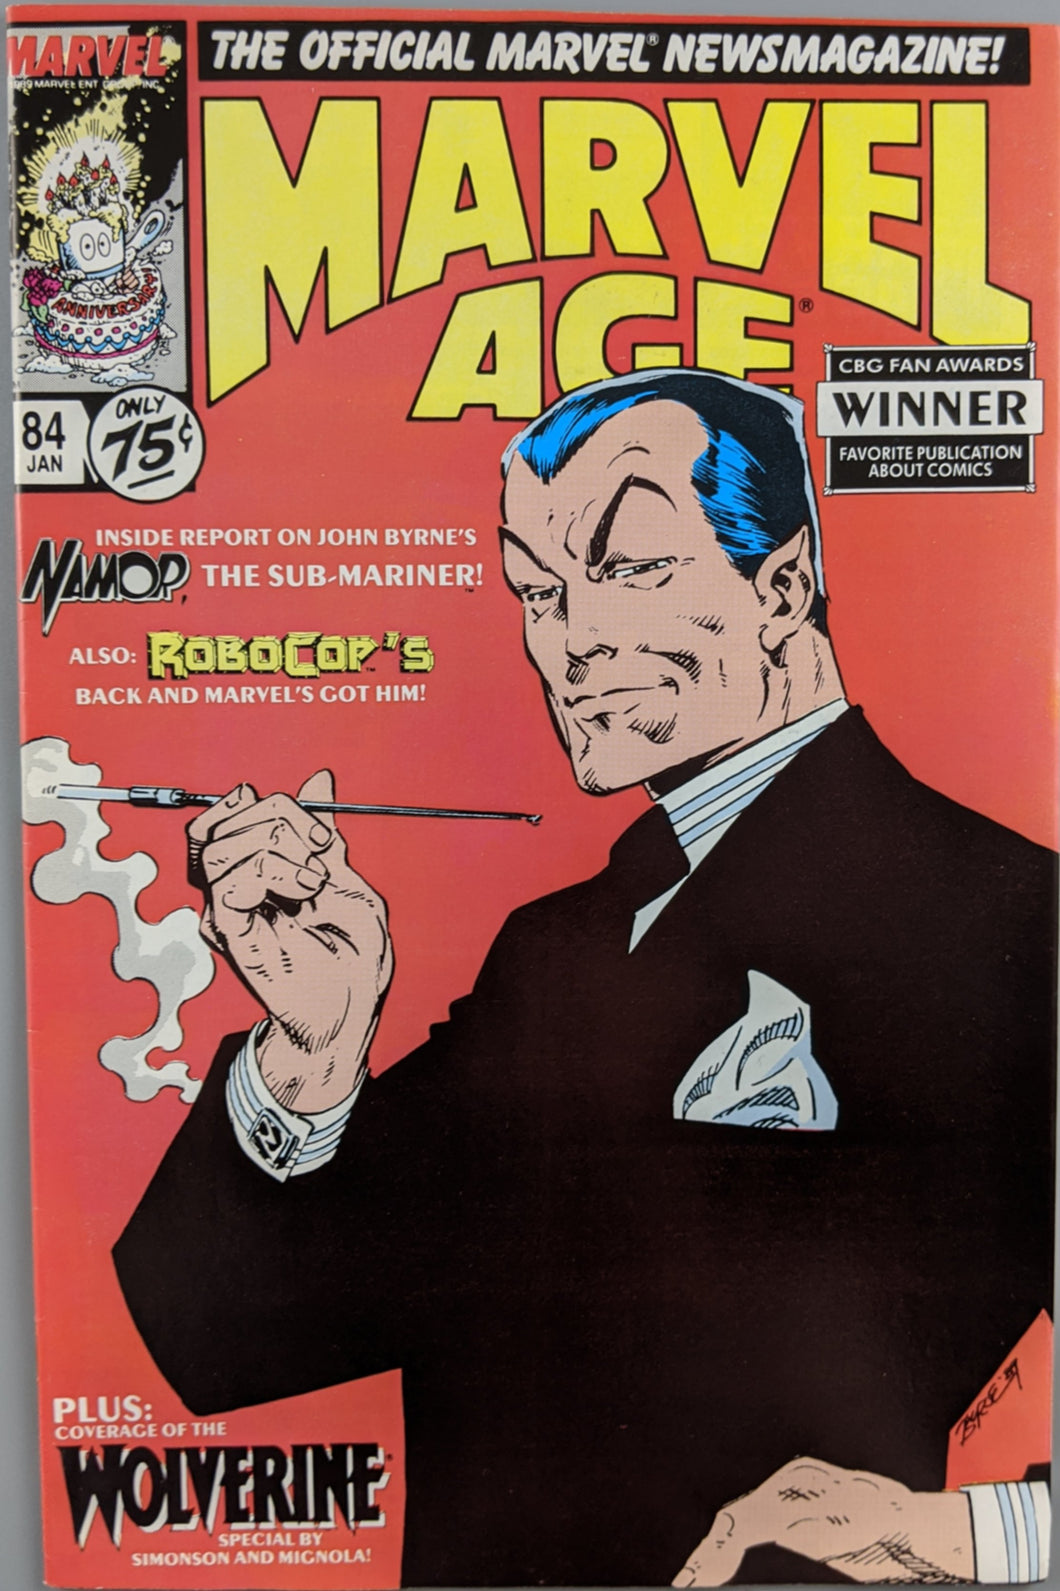 Marvel Age #84 Comic Book Cover Art